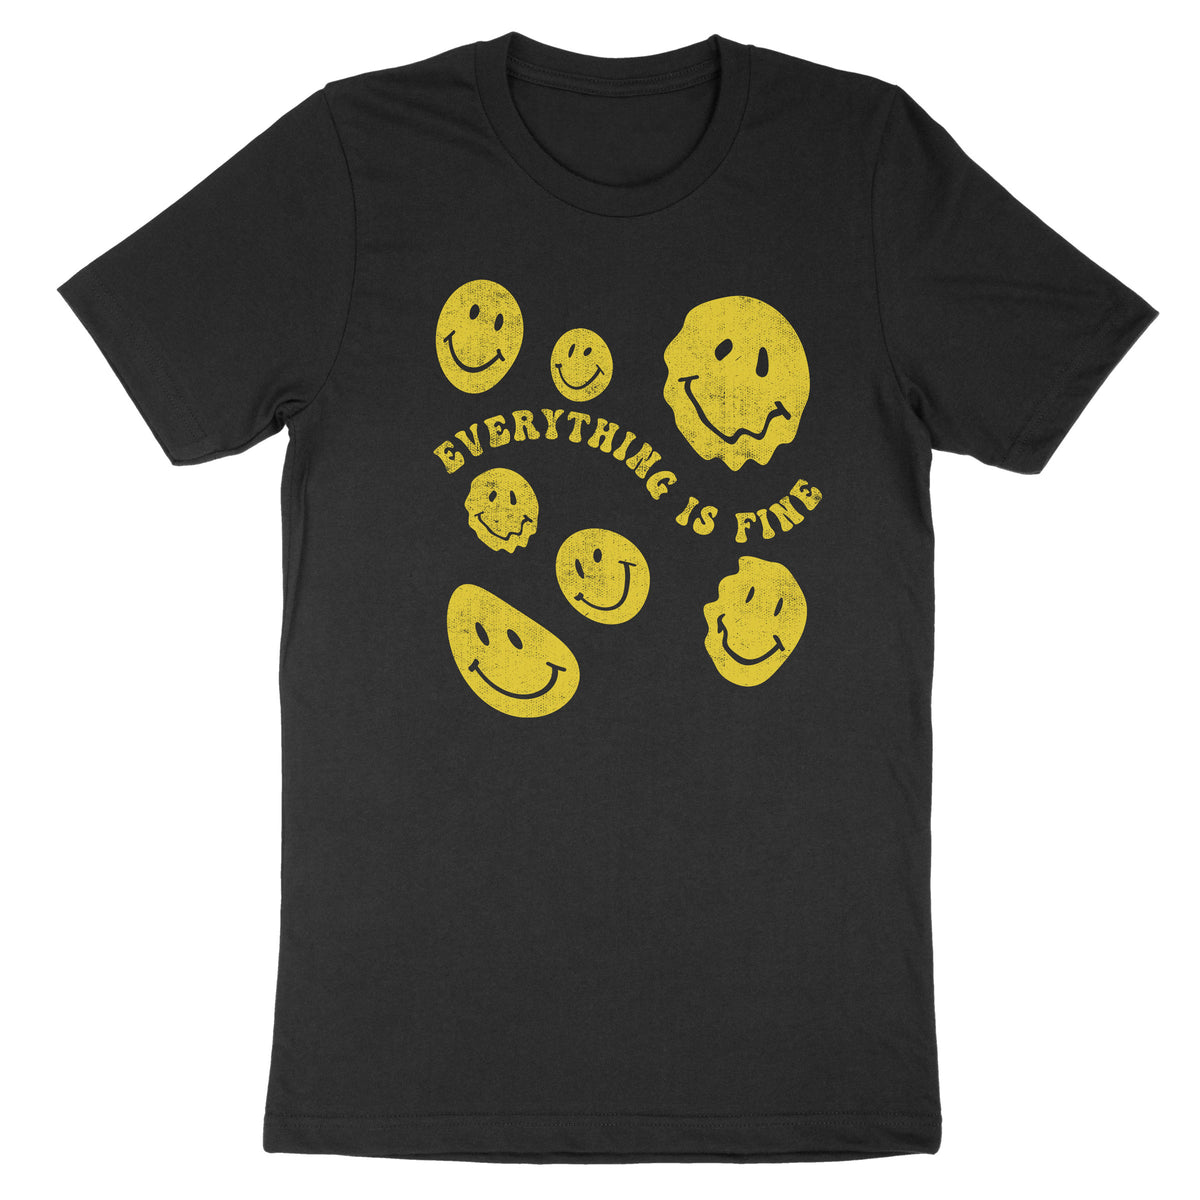 Everything Is Fine Melting Smilies Tee